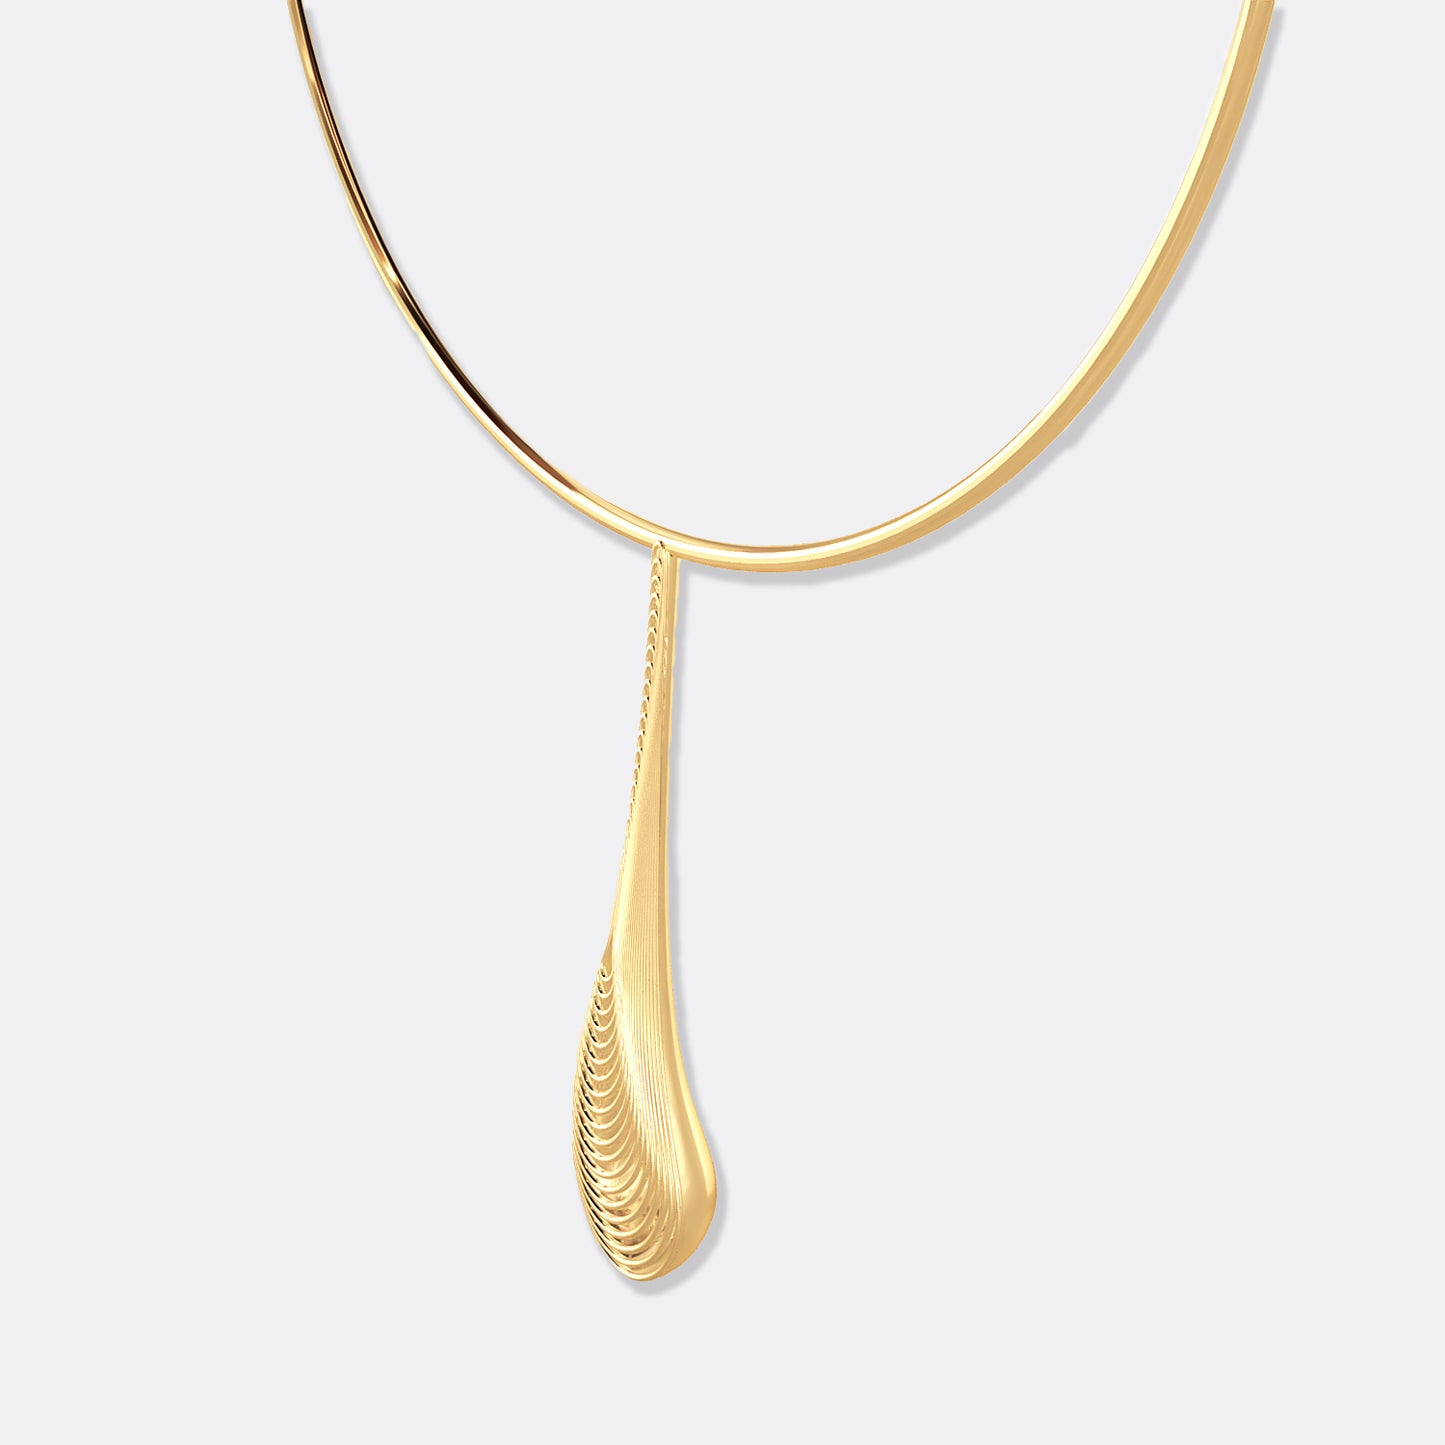 Beginning: 18ct Yellow Gold-Plated Sterling Silver Pendant